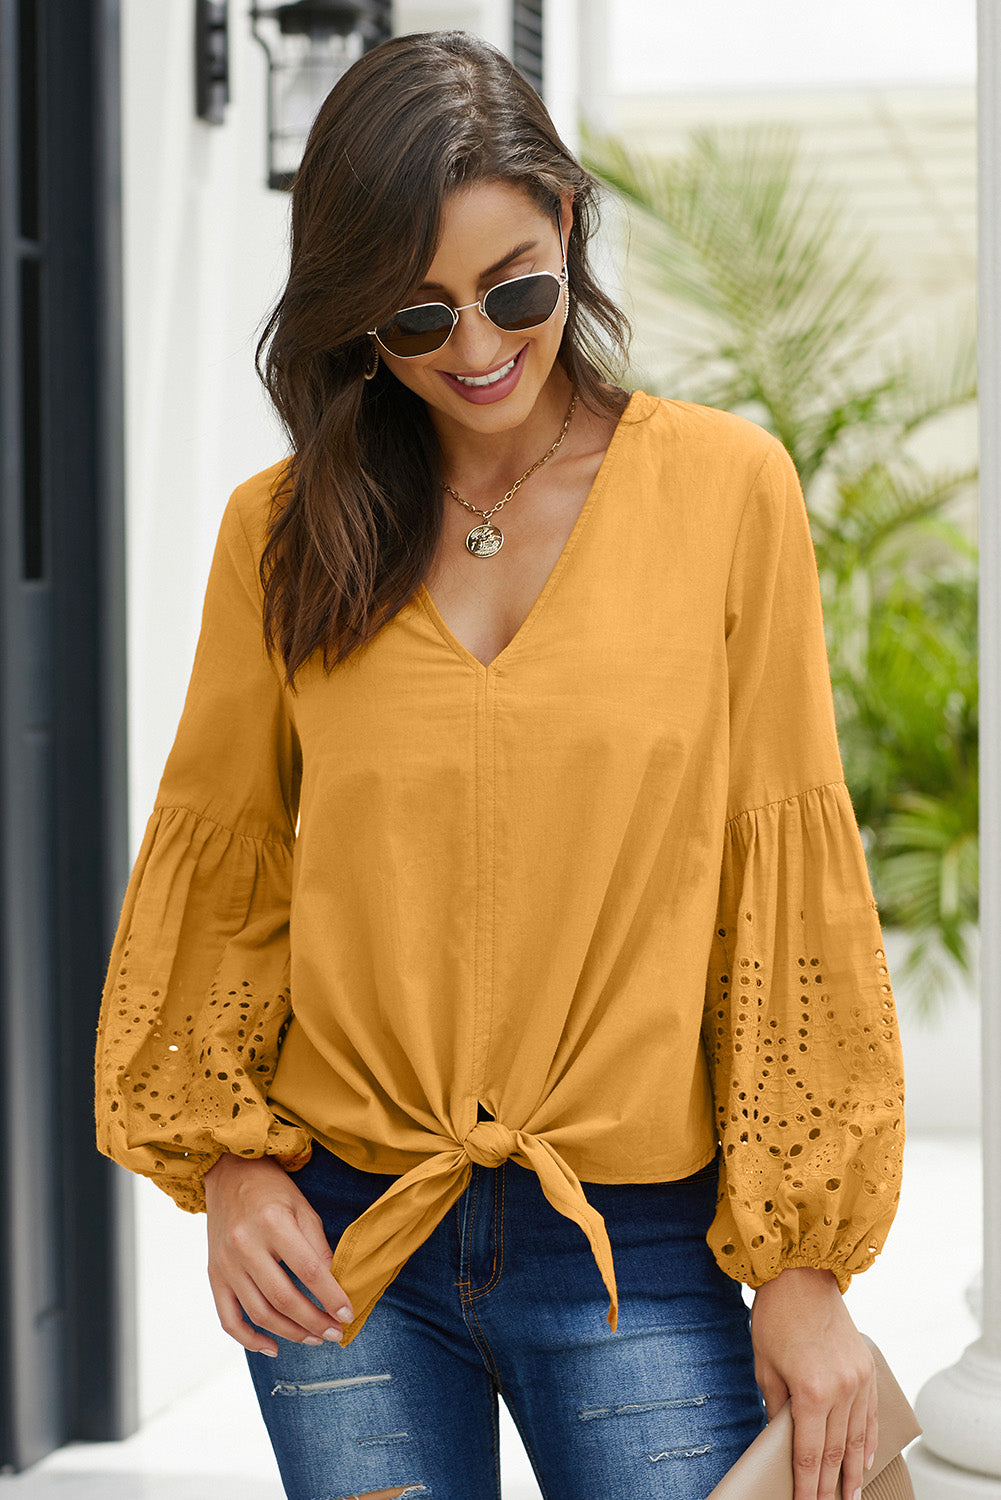 Yellow Women's Casual Autumn Balloon Sleeve Tie Top V Neck Blouse Loose Shirts LC252264-7